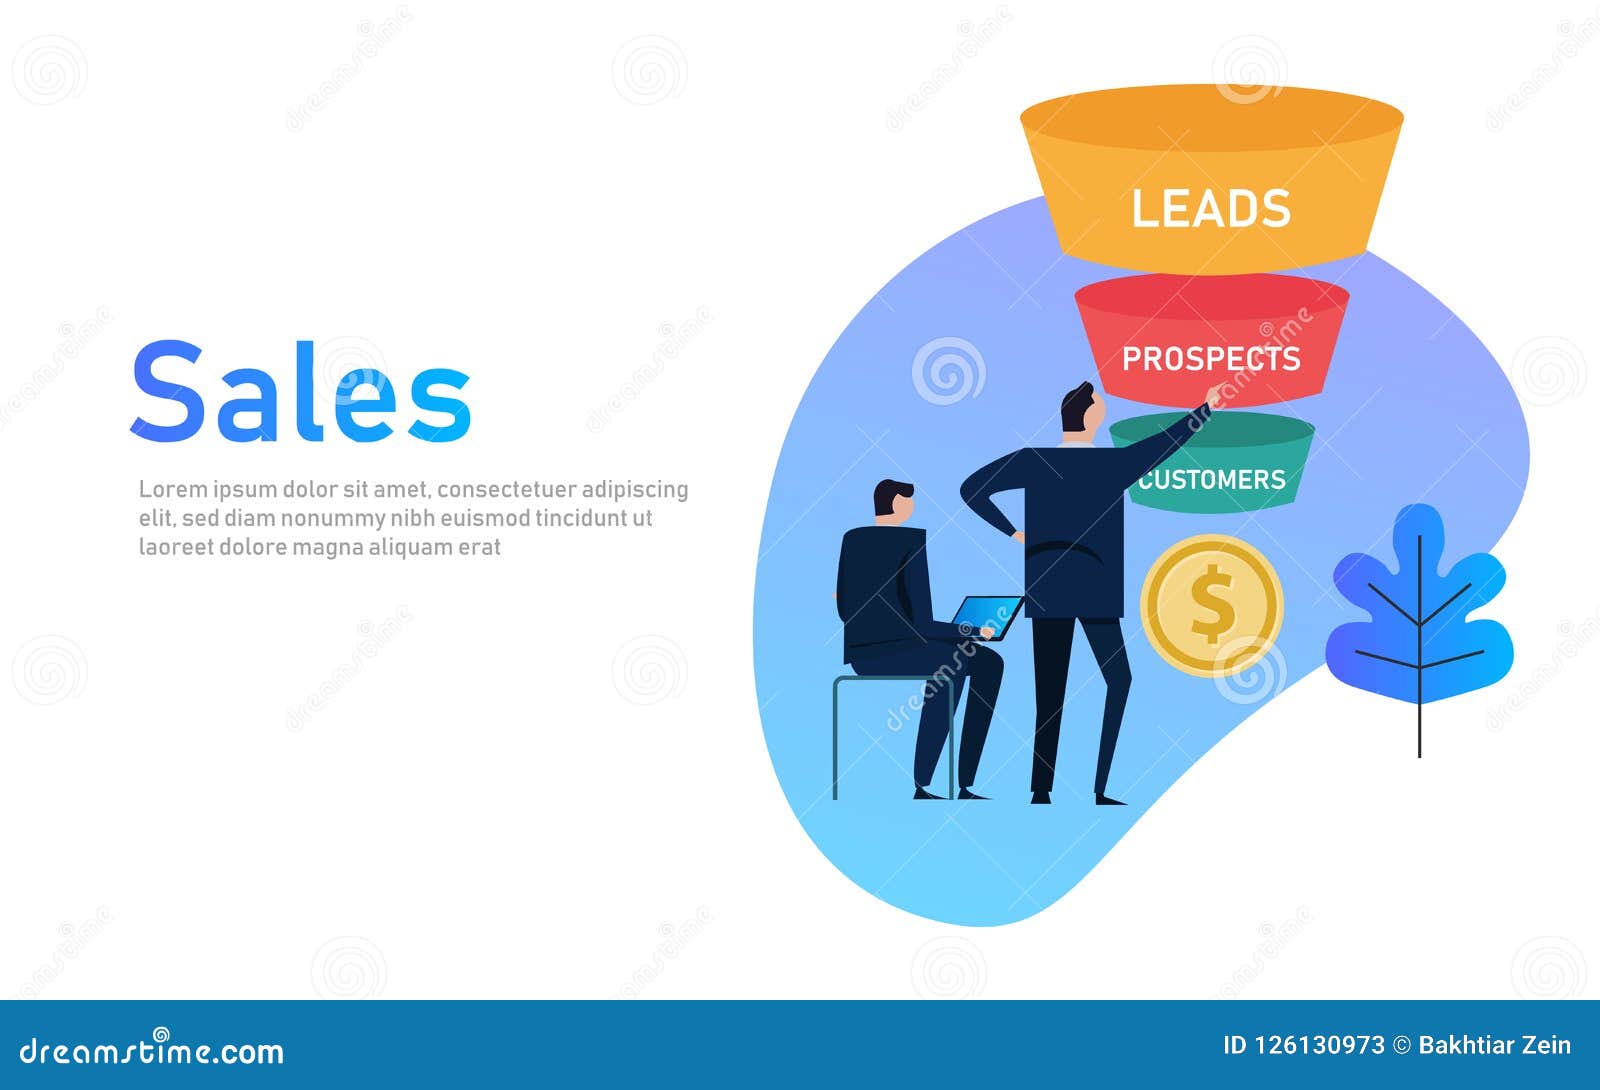 sales funnel business concept of leads prospects and customers coin money.